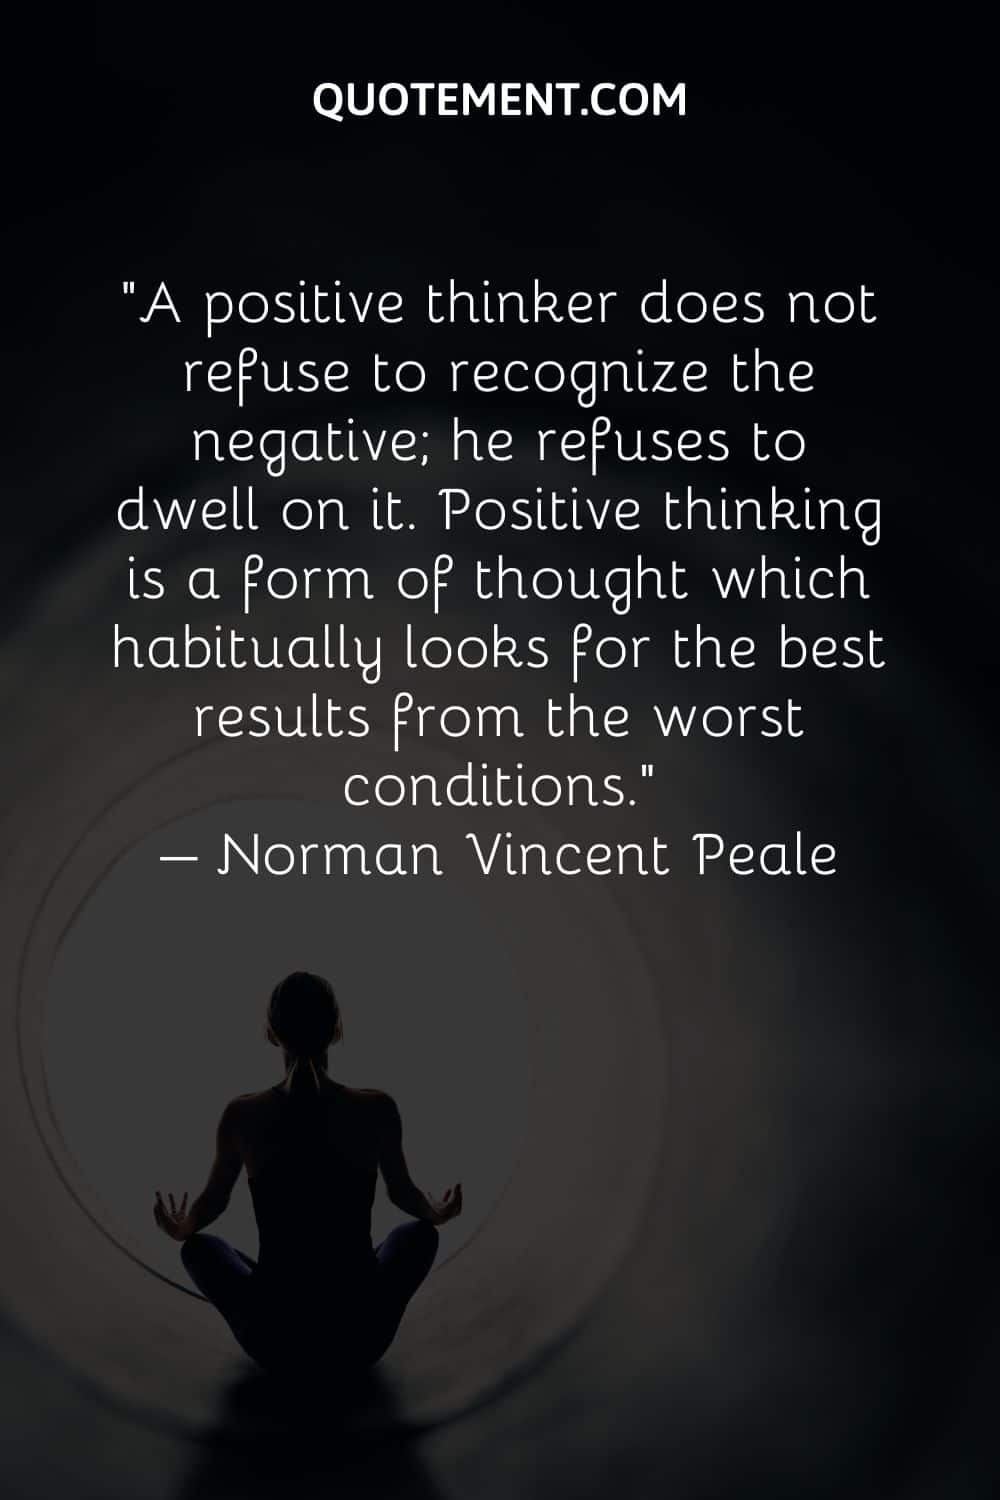 A positive thinker does not refuse to recognize the negative